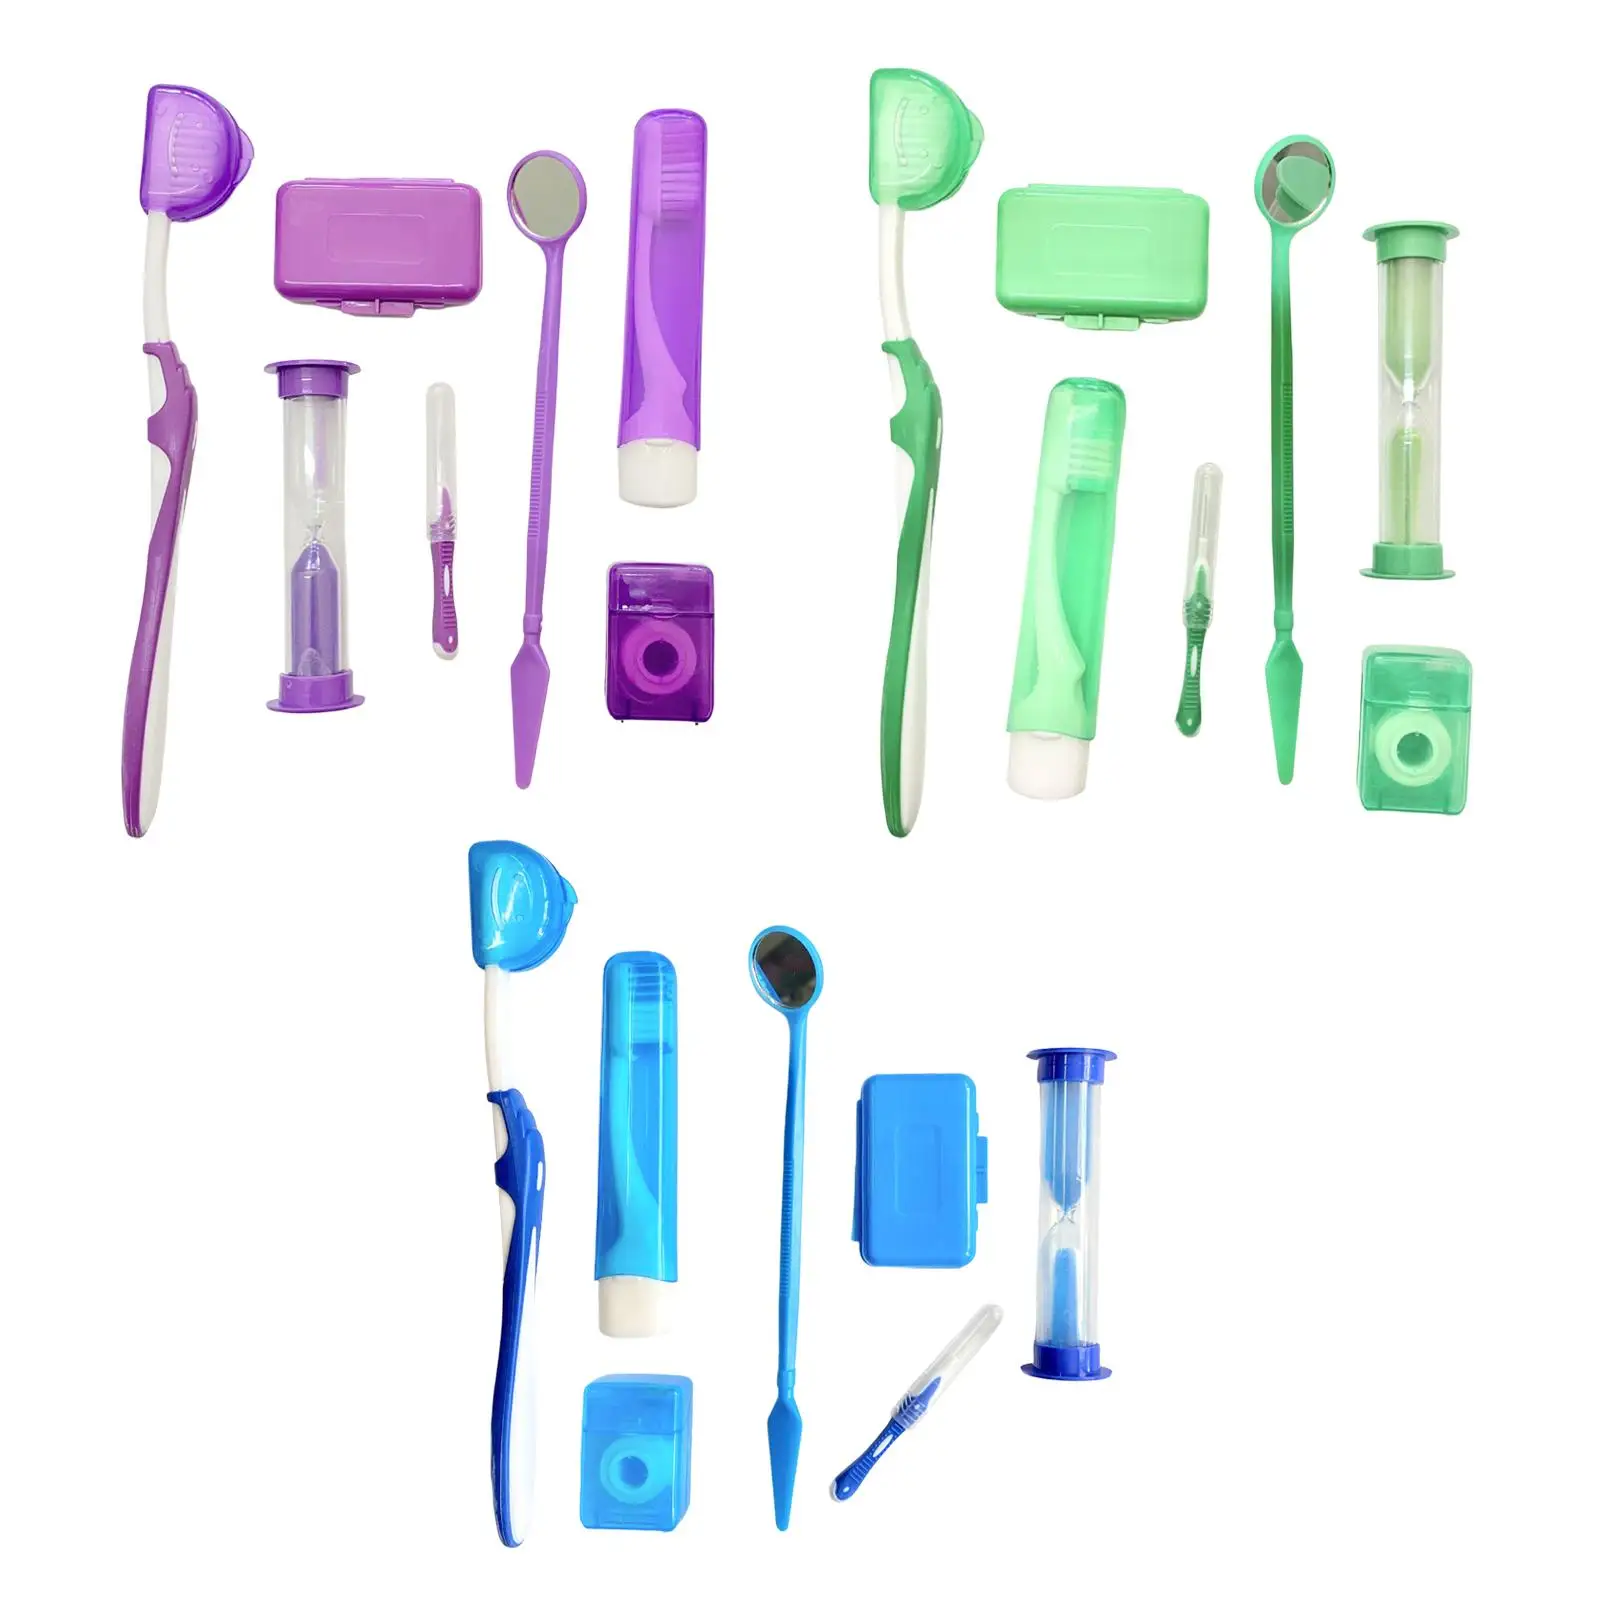 8 Sets Cleaning Tools Floss Thread Toothbrush